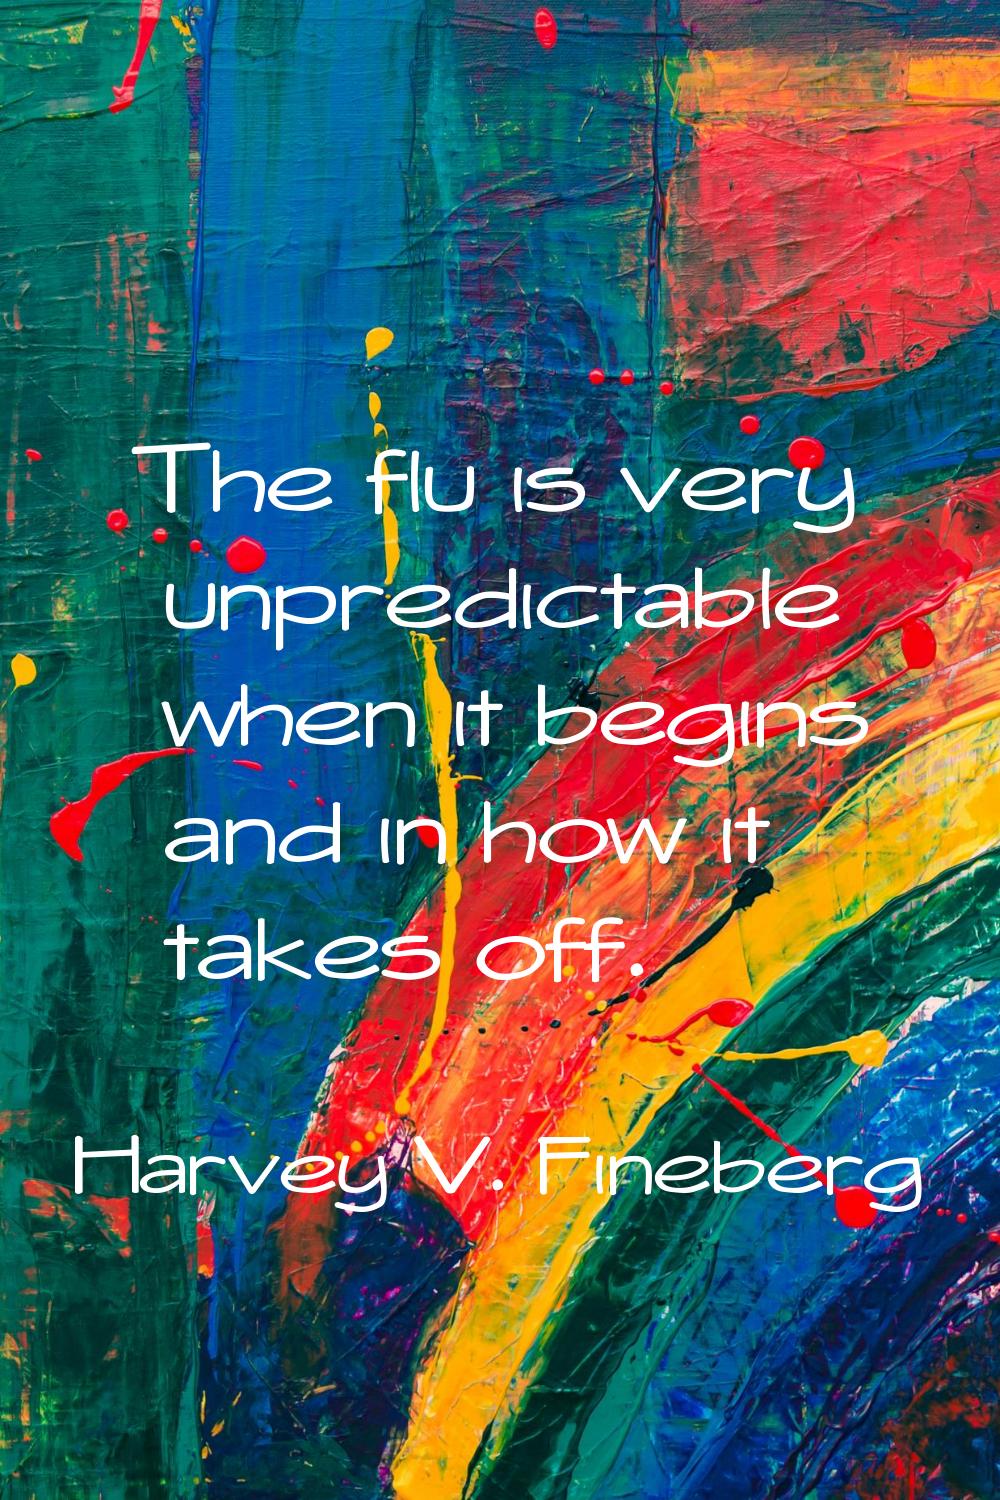 The flu is very unpredictable when it begins and in how it takes off.